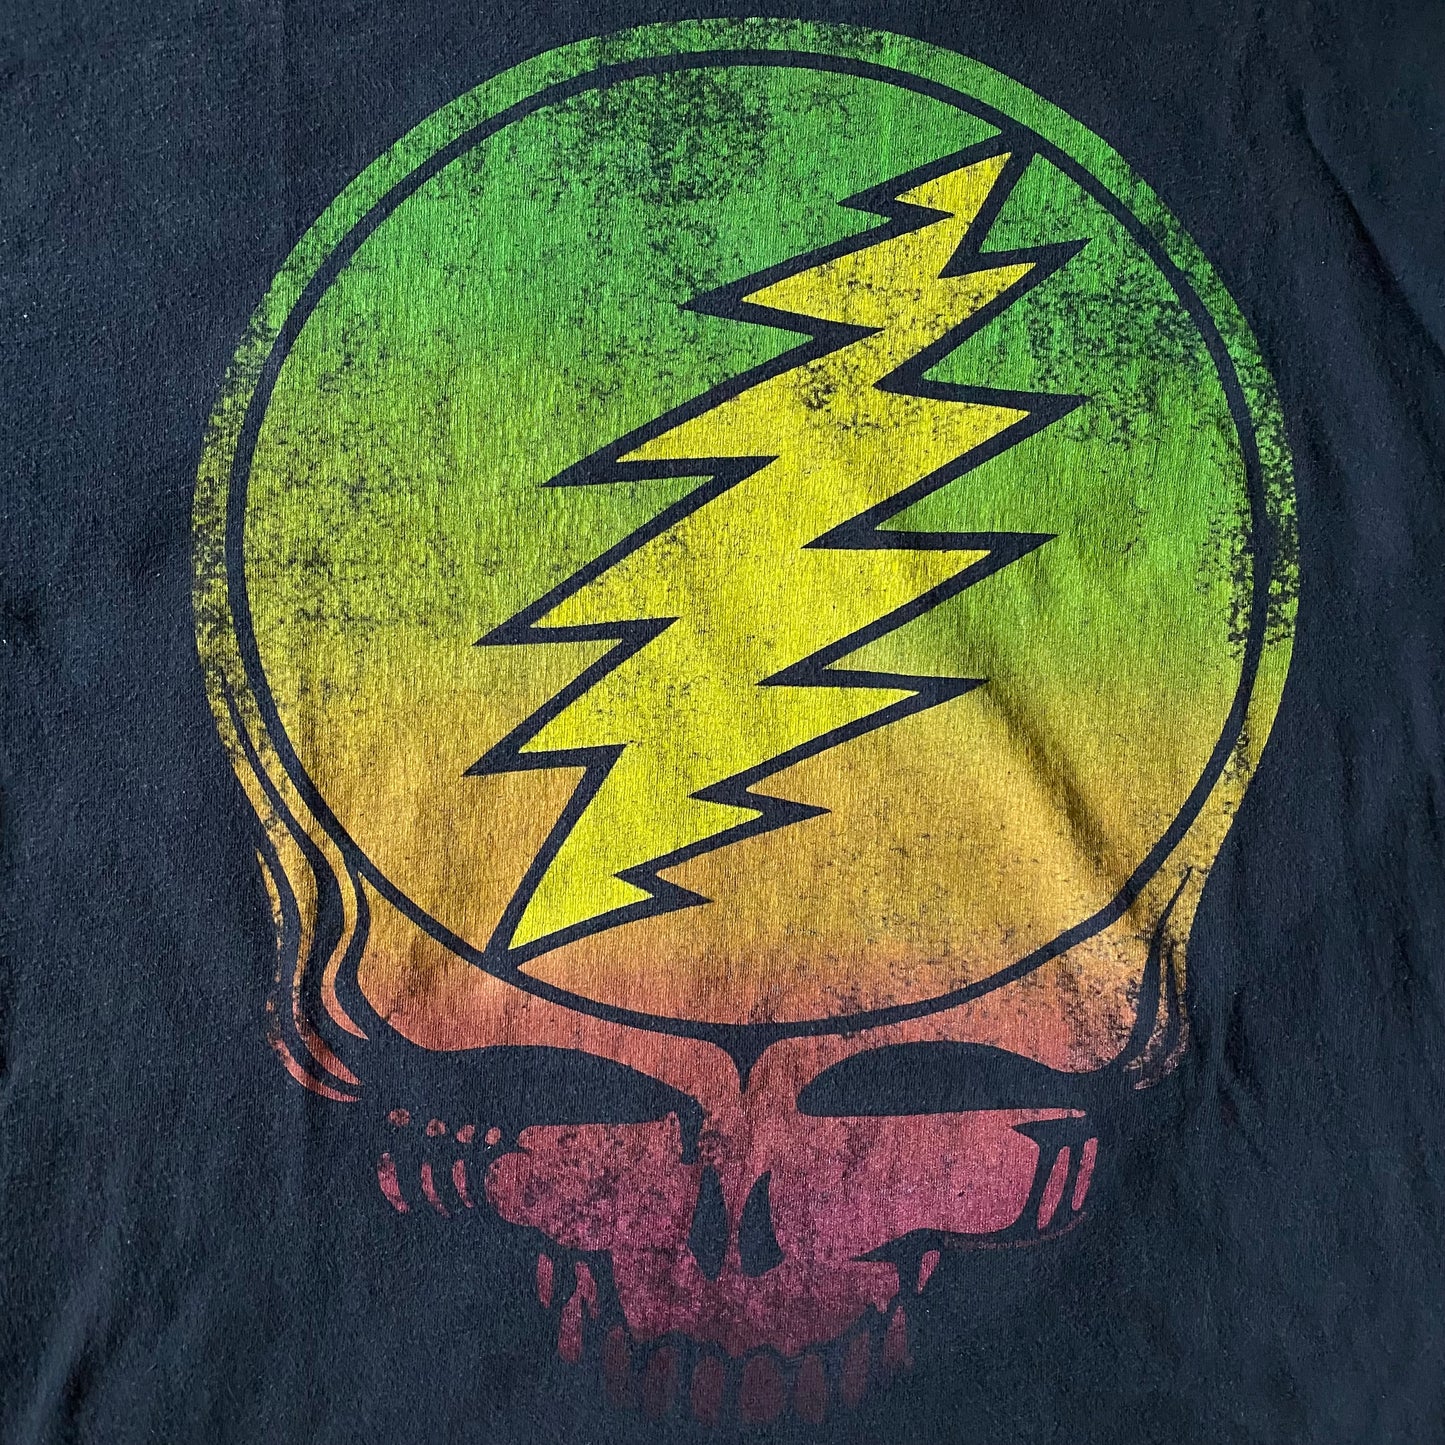 Grateful Dead Steal Your Face Gradient Tee